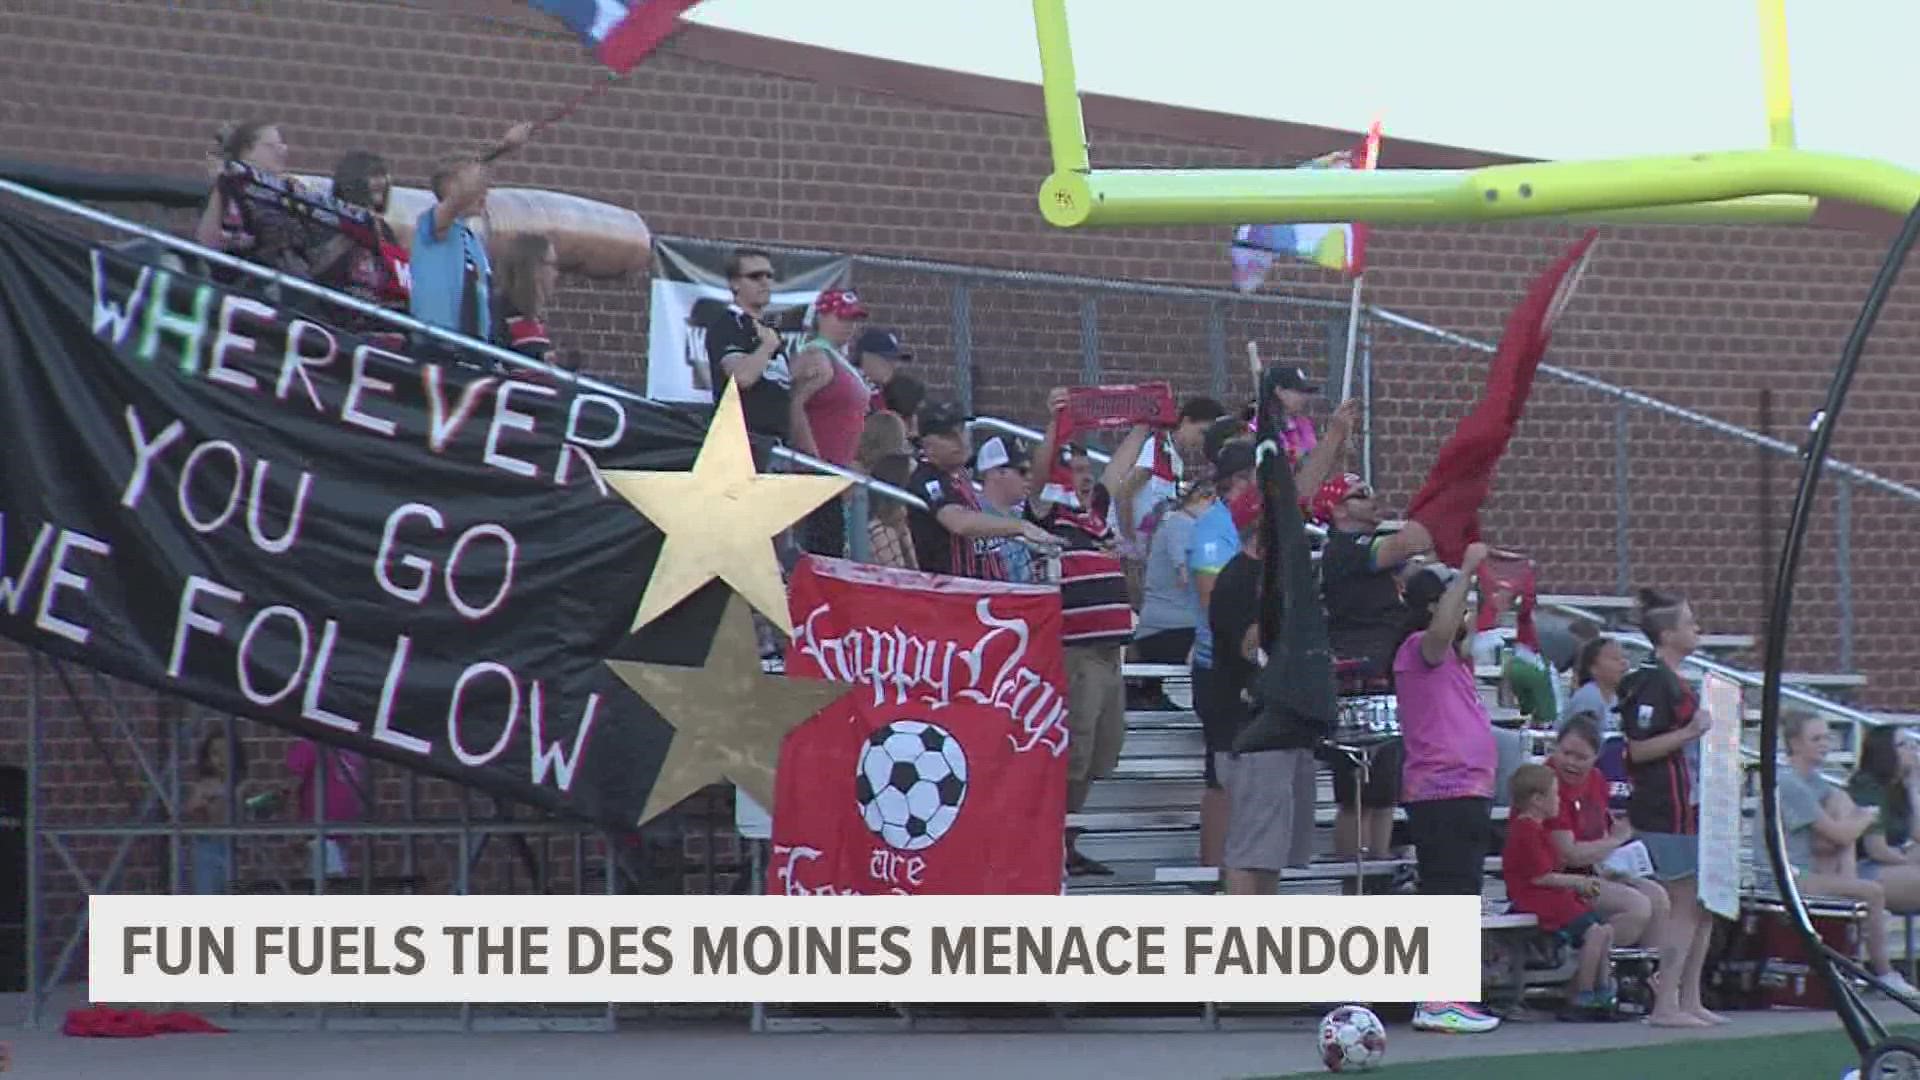 Some Menace fans have been cheering for the team since childhood.